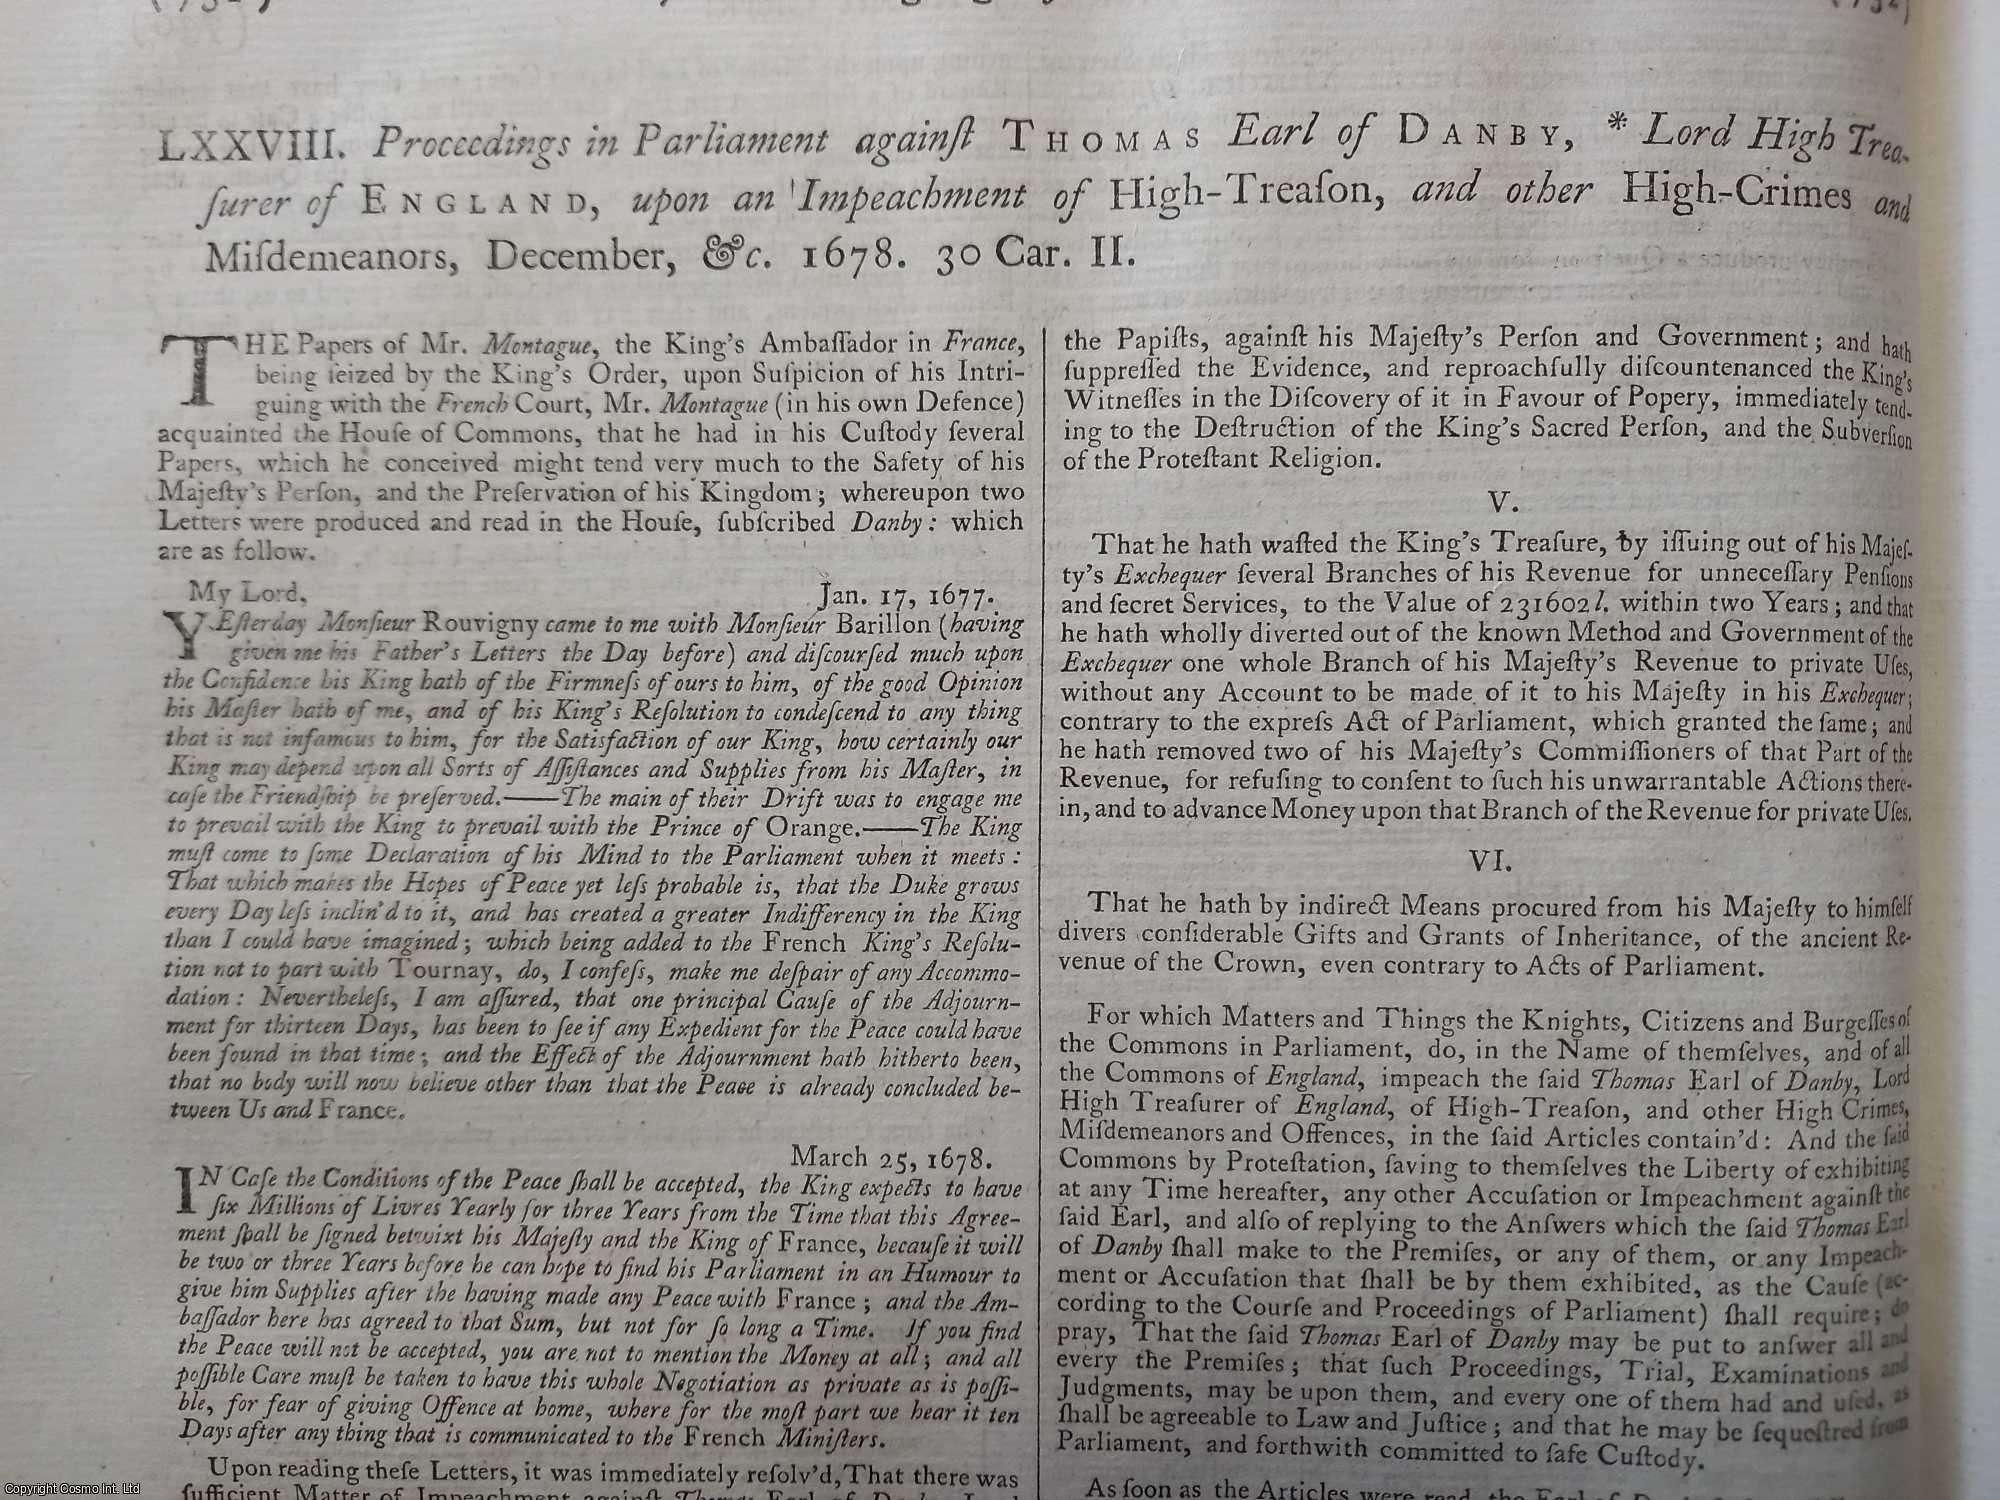 [Trial] - Articles of Impeachment of High Treason, and other High Crimes and Misdemeanours, against Thomas Earl of Danby, Lord High Treasurer of England, 1678. An original article from the Collected State Trials.